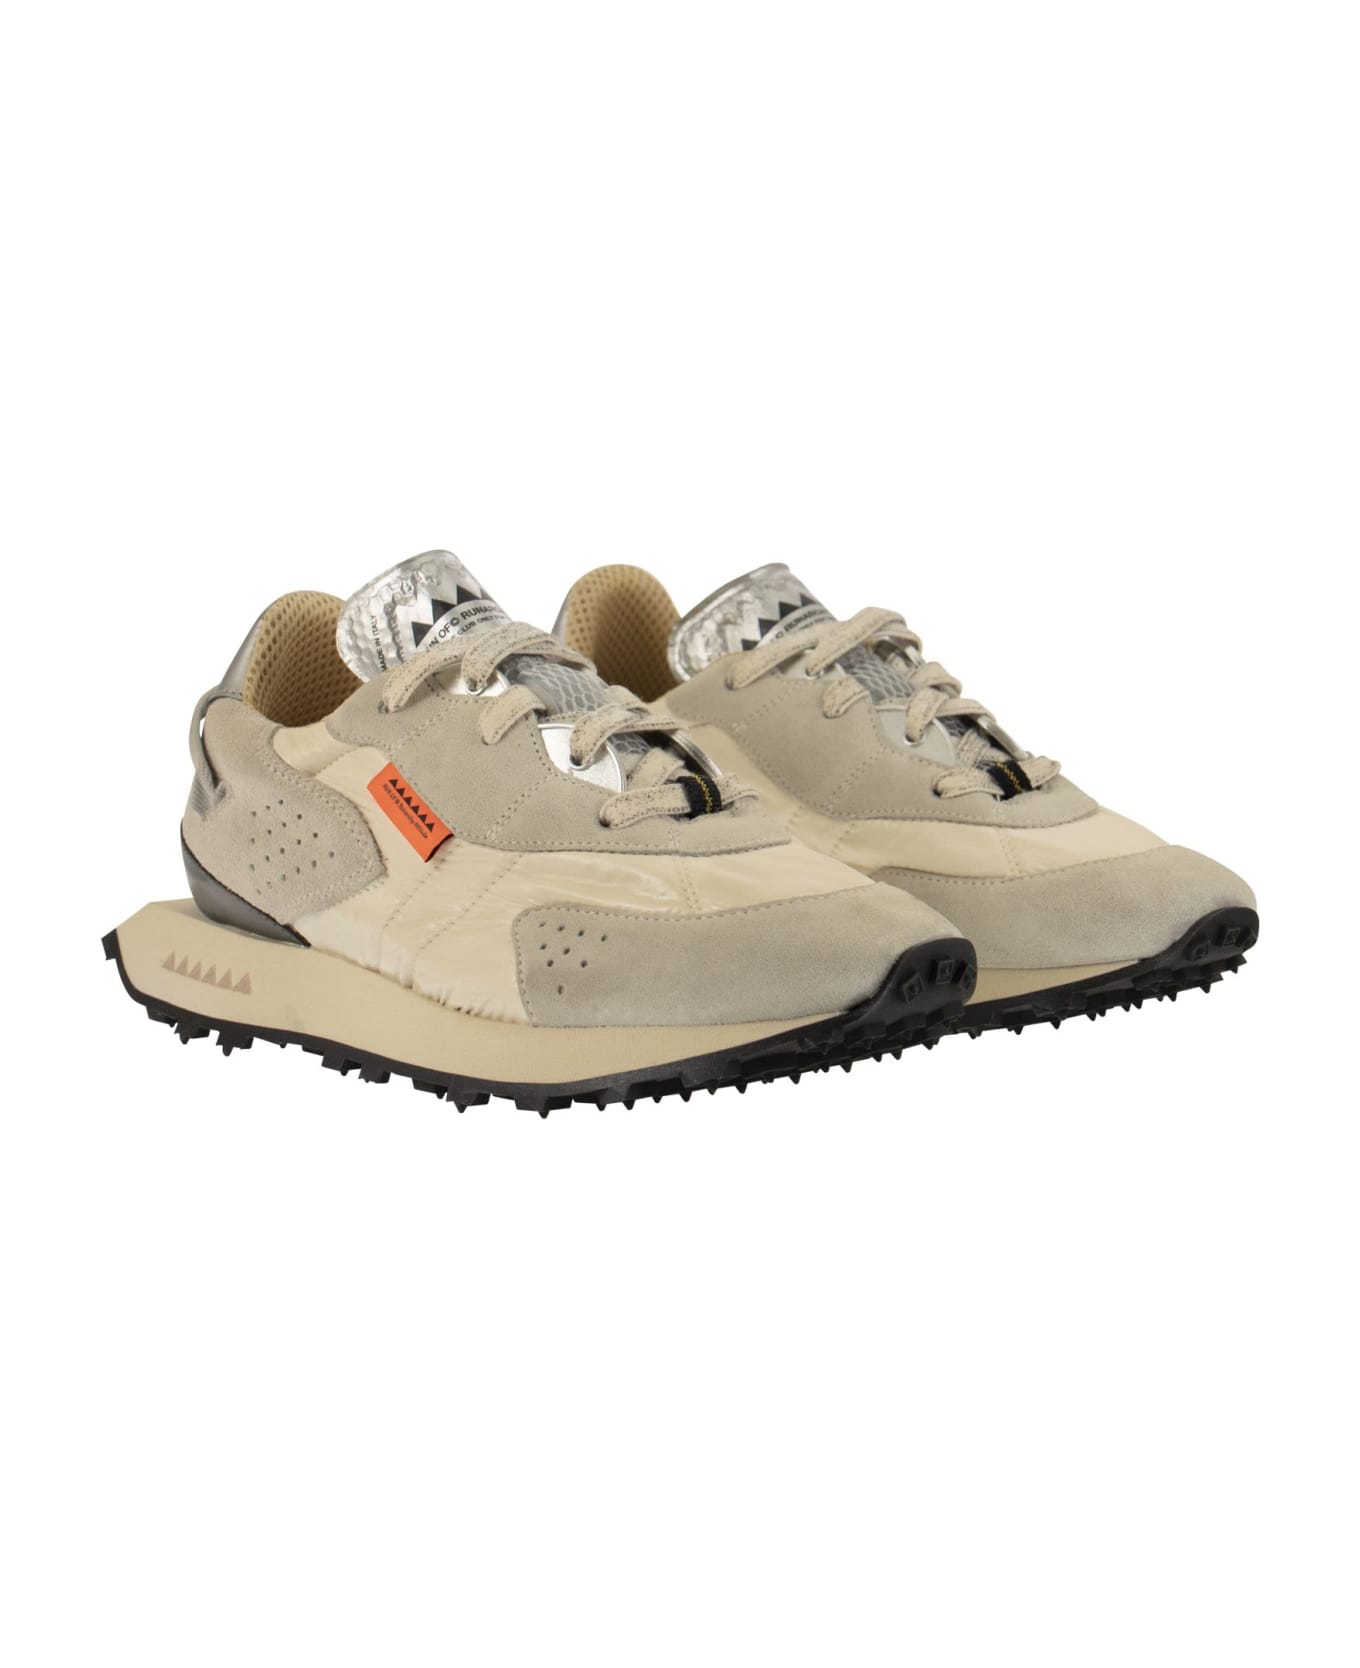 RUN OF Vaporix - Suede And Nylon Trainers - Sand スニーカー